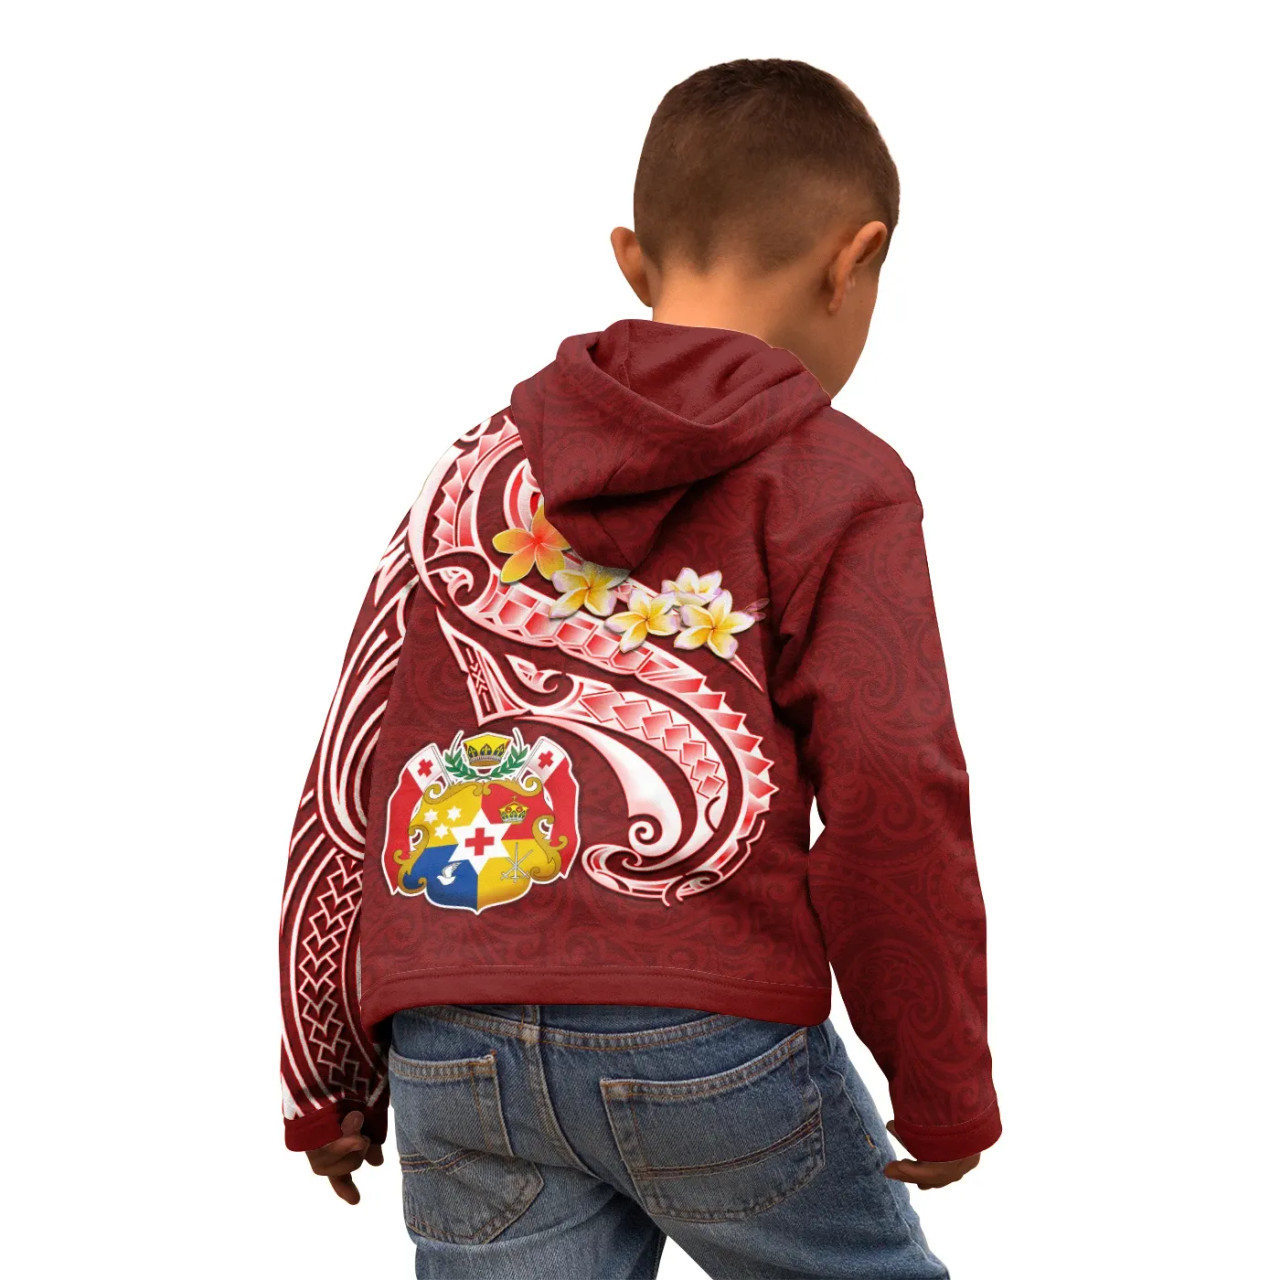 Tonga Personalised Hoodie - Tonga Coat Of Arms With Polynesian Patterns